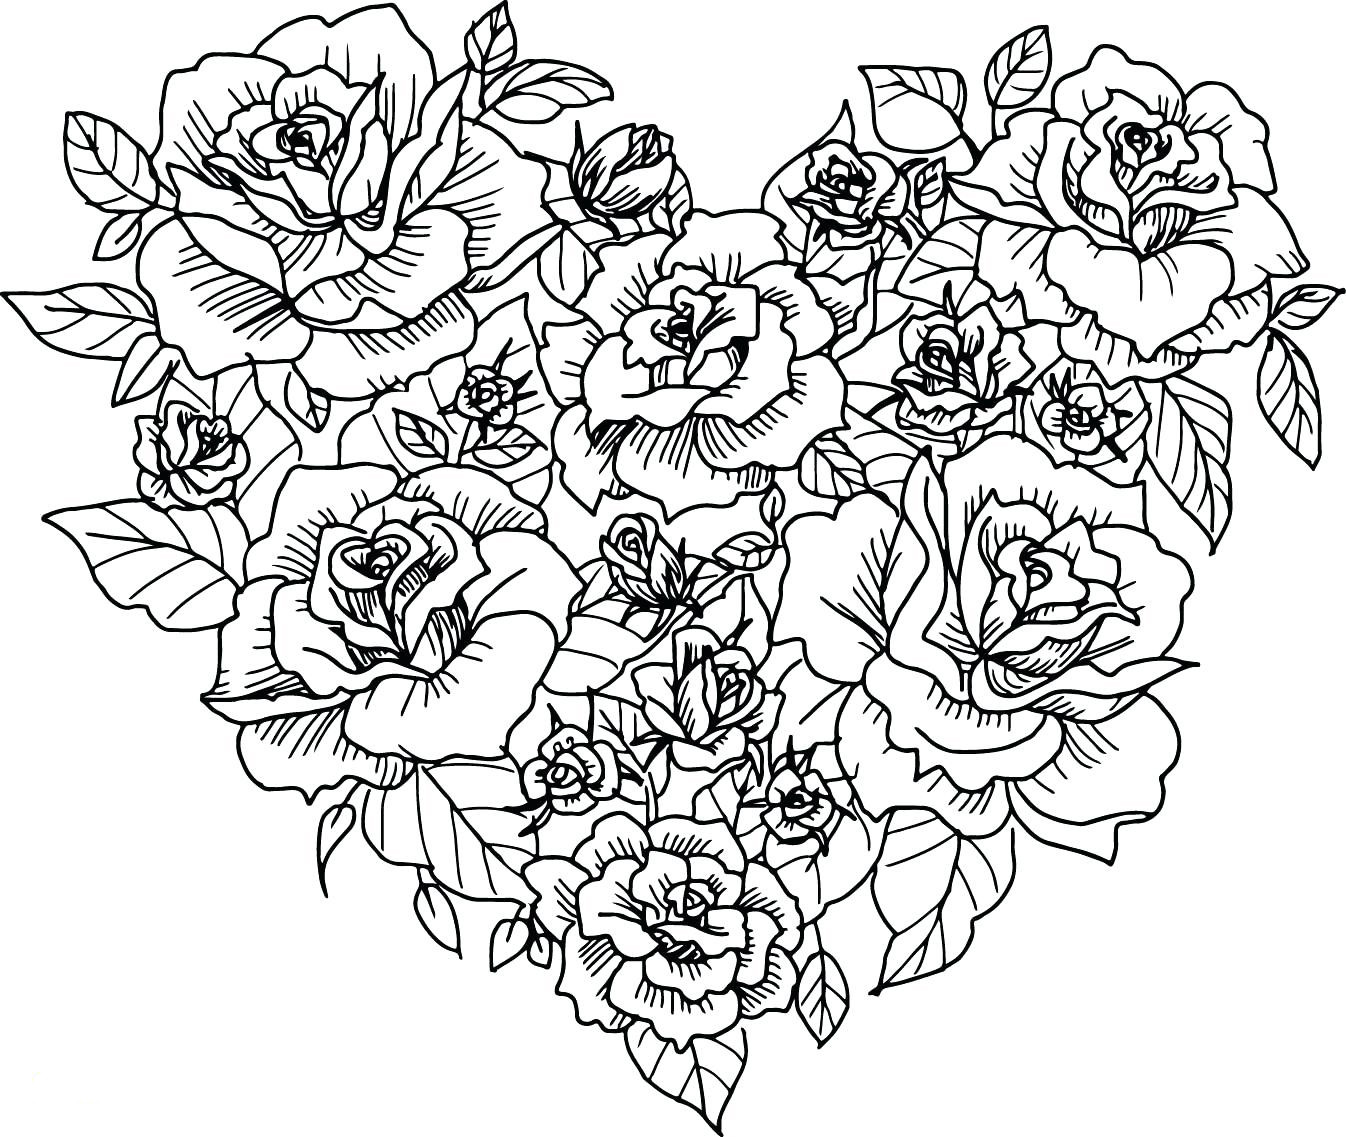 Adult Coloring Pages Heart
 Hearts Coloring Pages for Adults Best Coloring Pages For